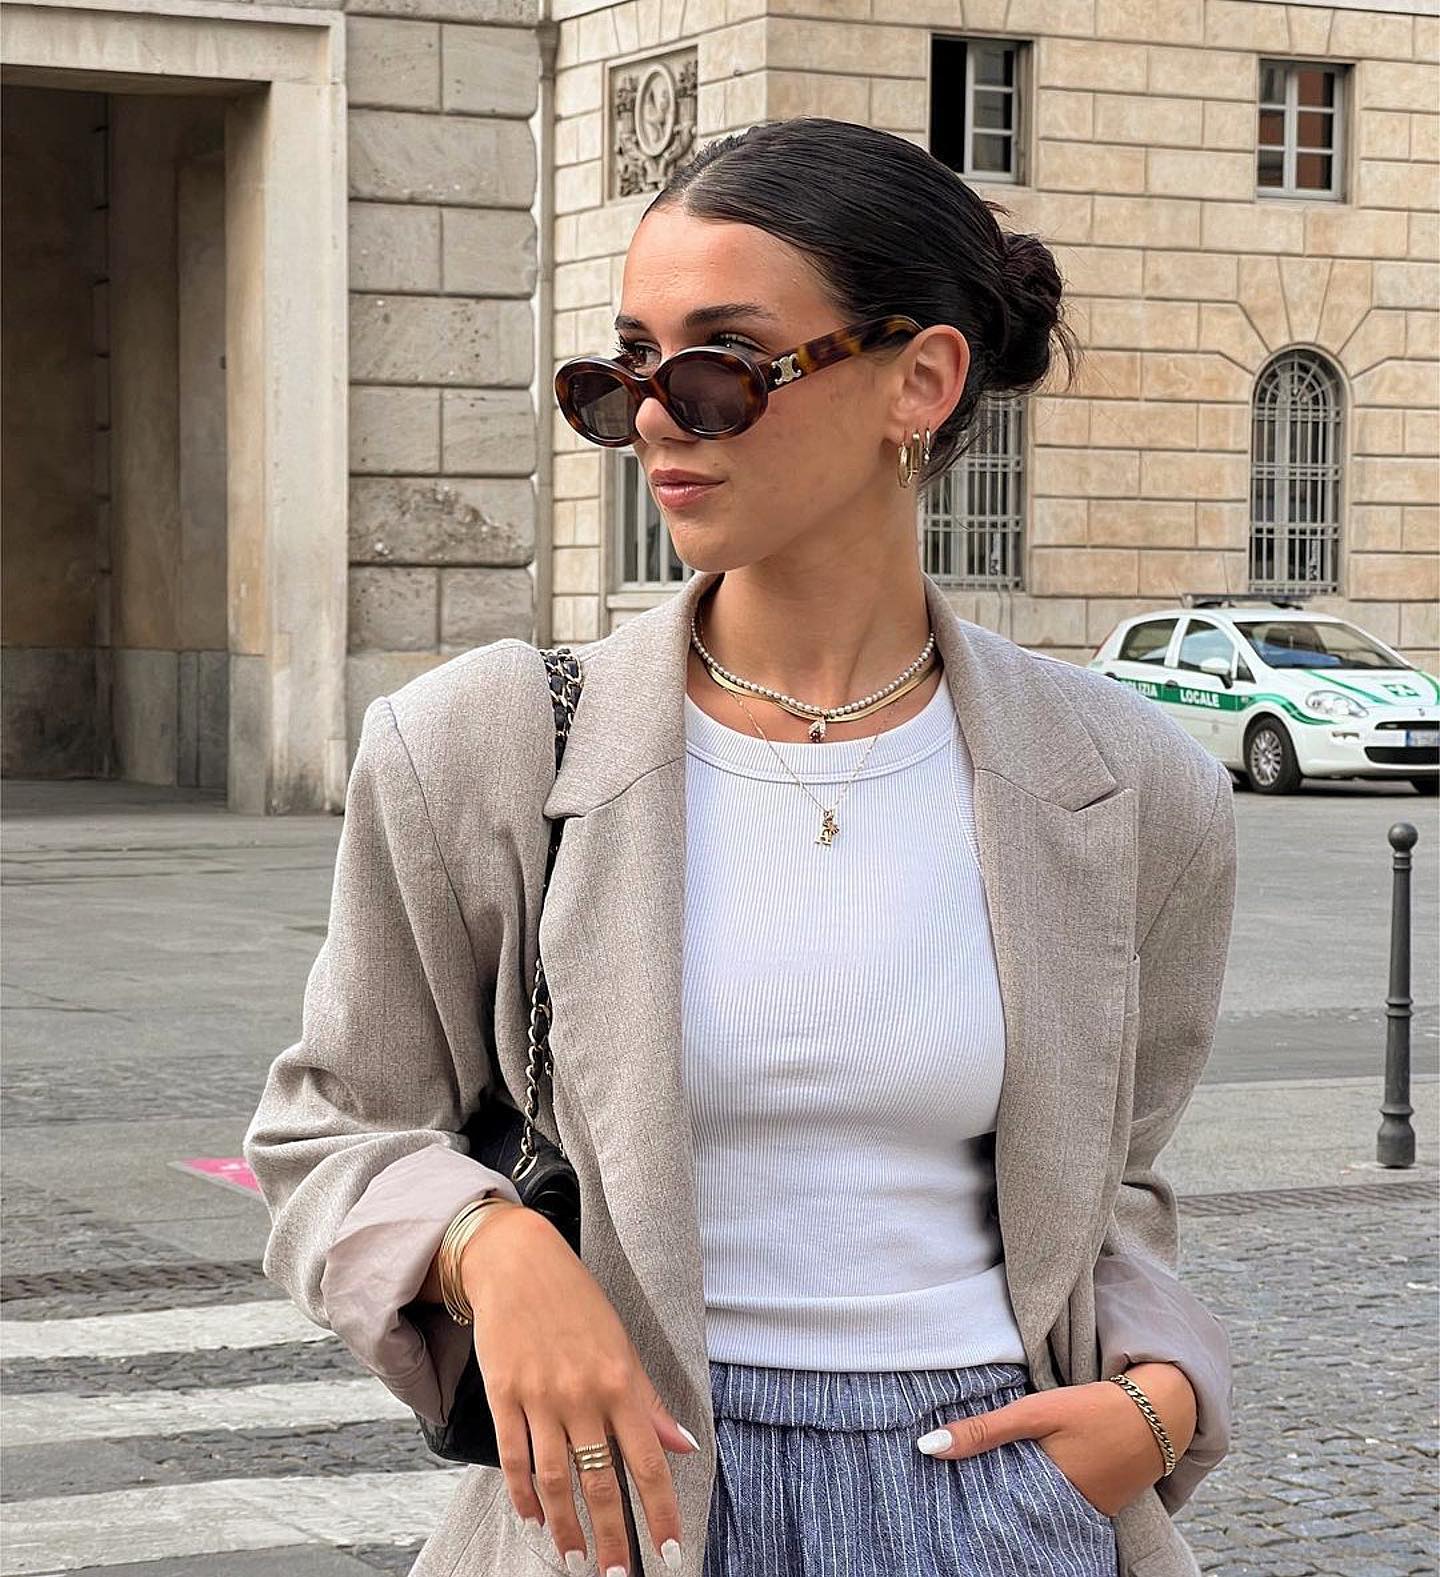 🌟 Start your week in style with Celine Eyewear! 🌟 📷 Don't forget to tag us in your stylish eyewear photos using #optiekvanlindt #repost